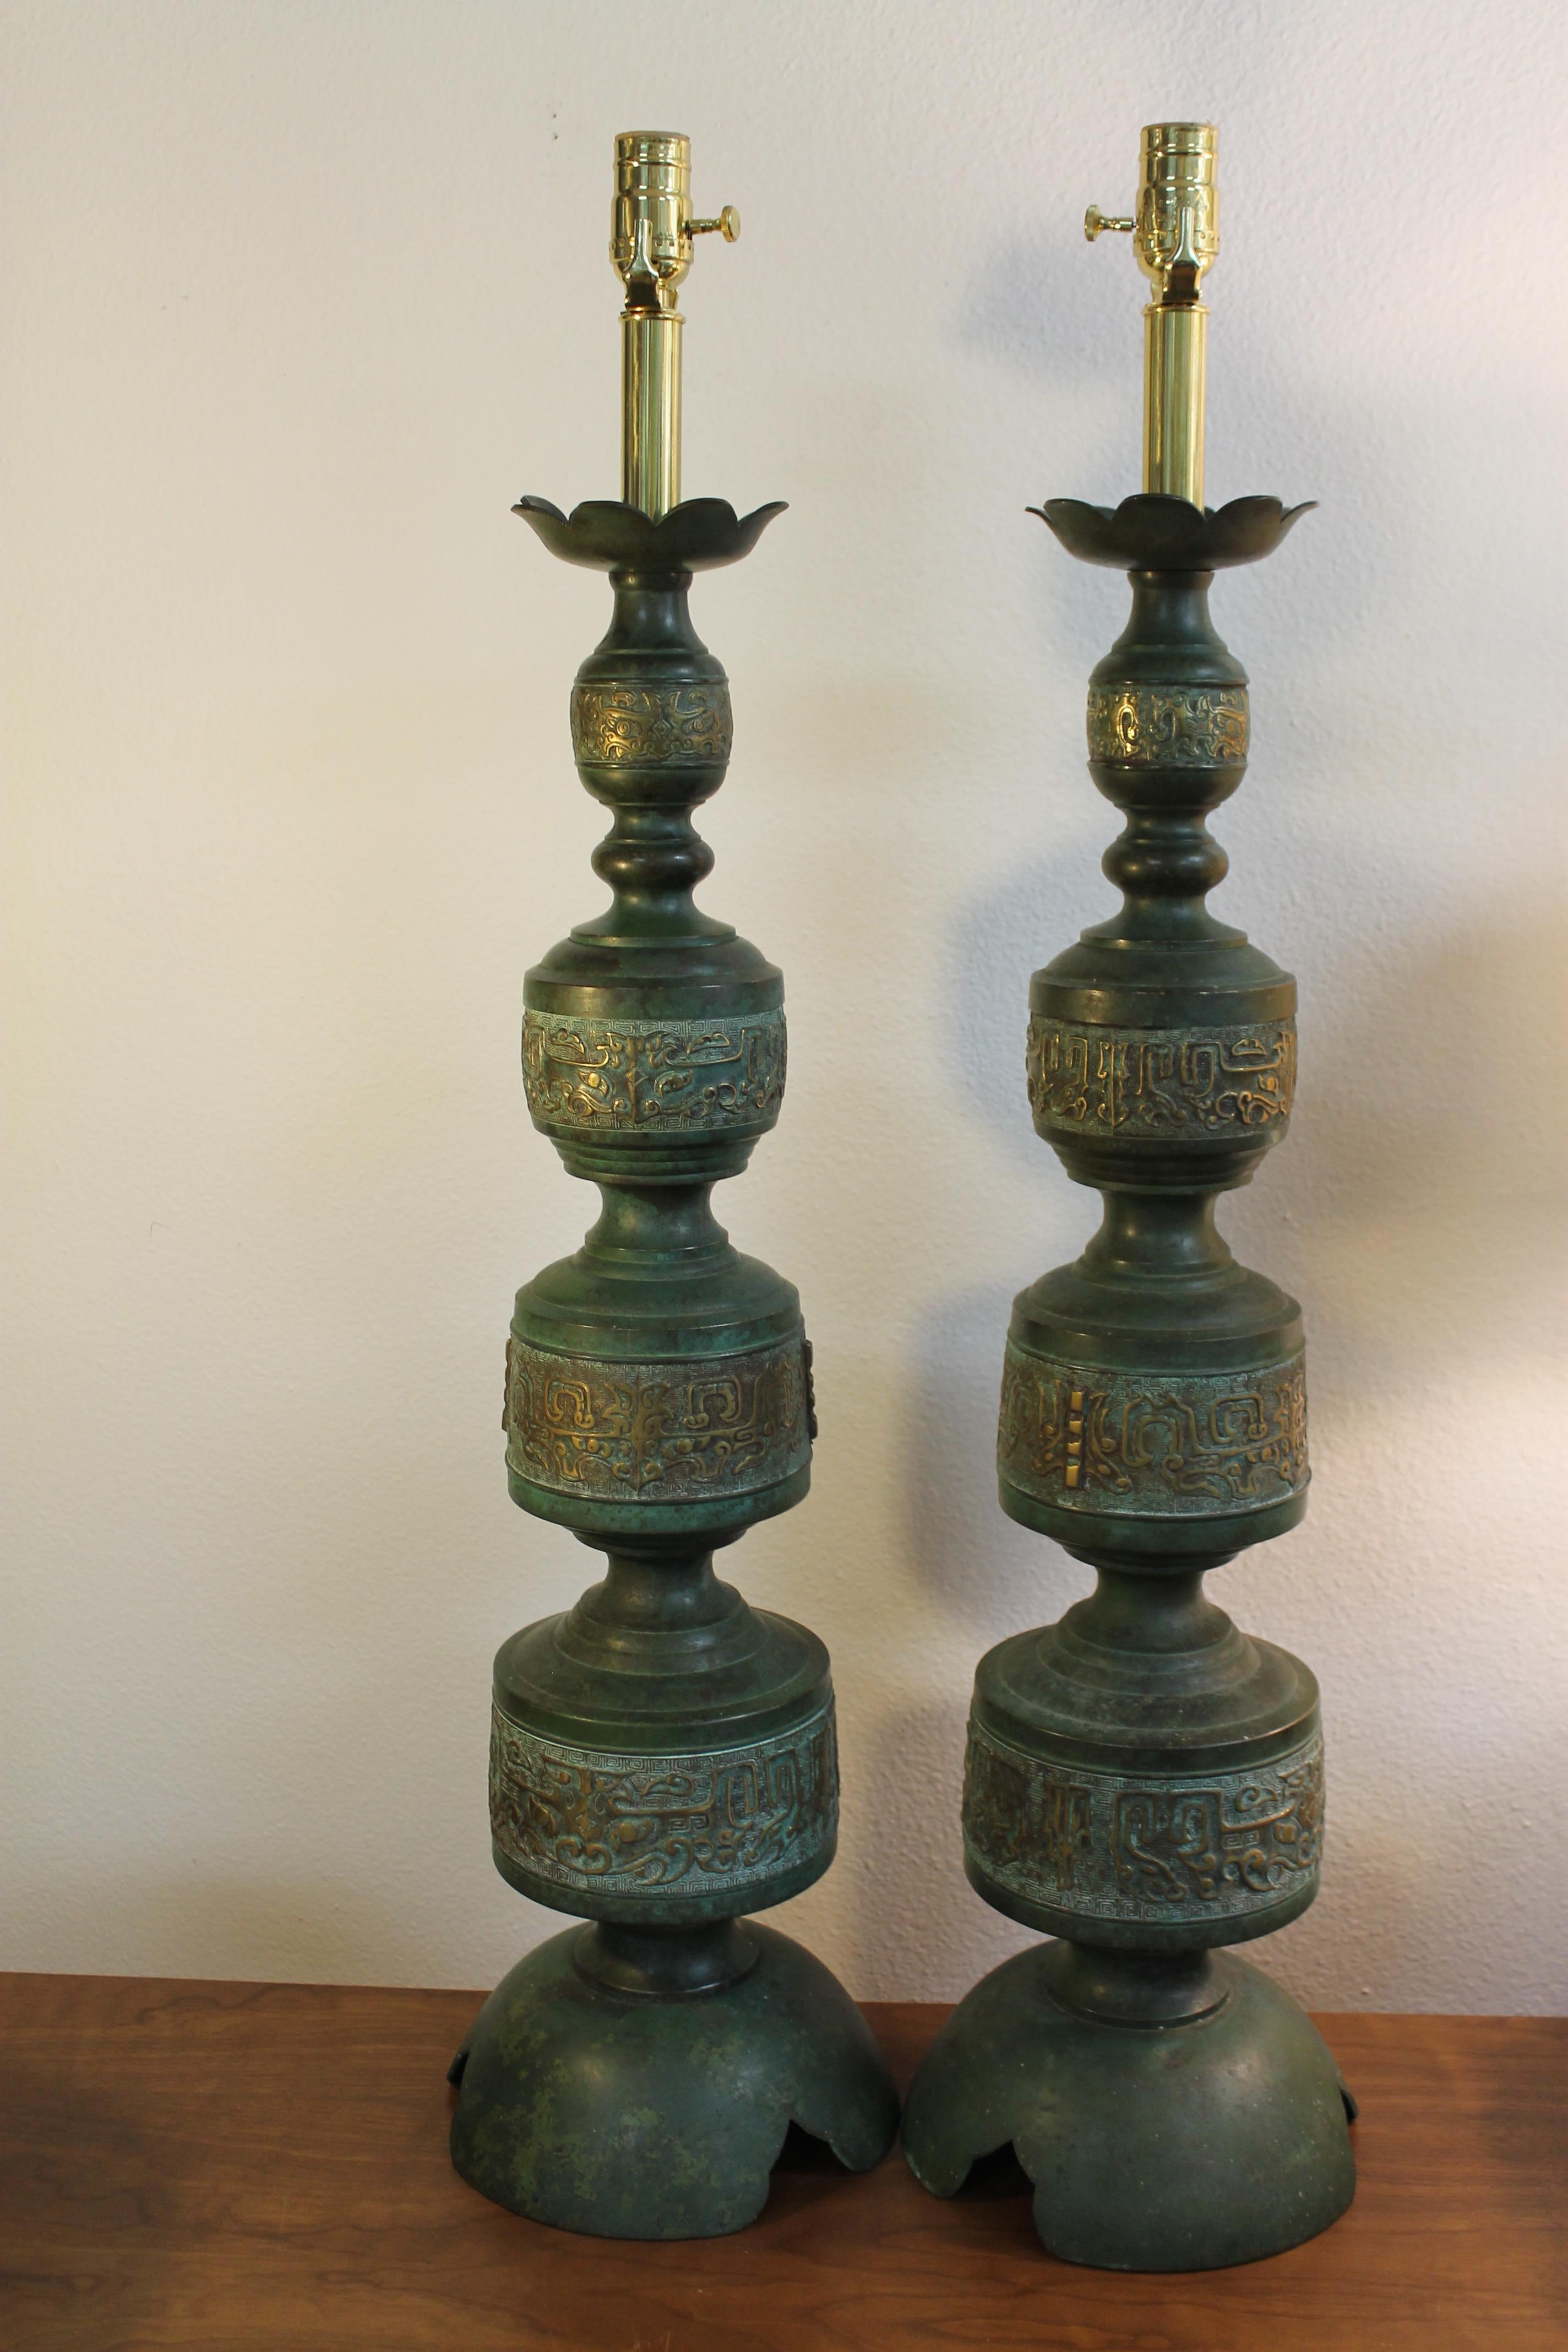 Pair of green brass patinated lamps. In the style of Frederick Cooper.  Looks like an Asian motif throughout. Lamps measure: 32.5